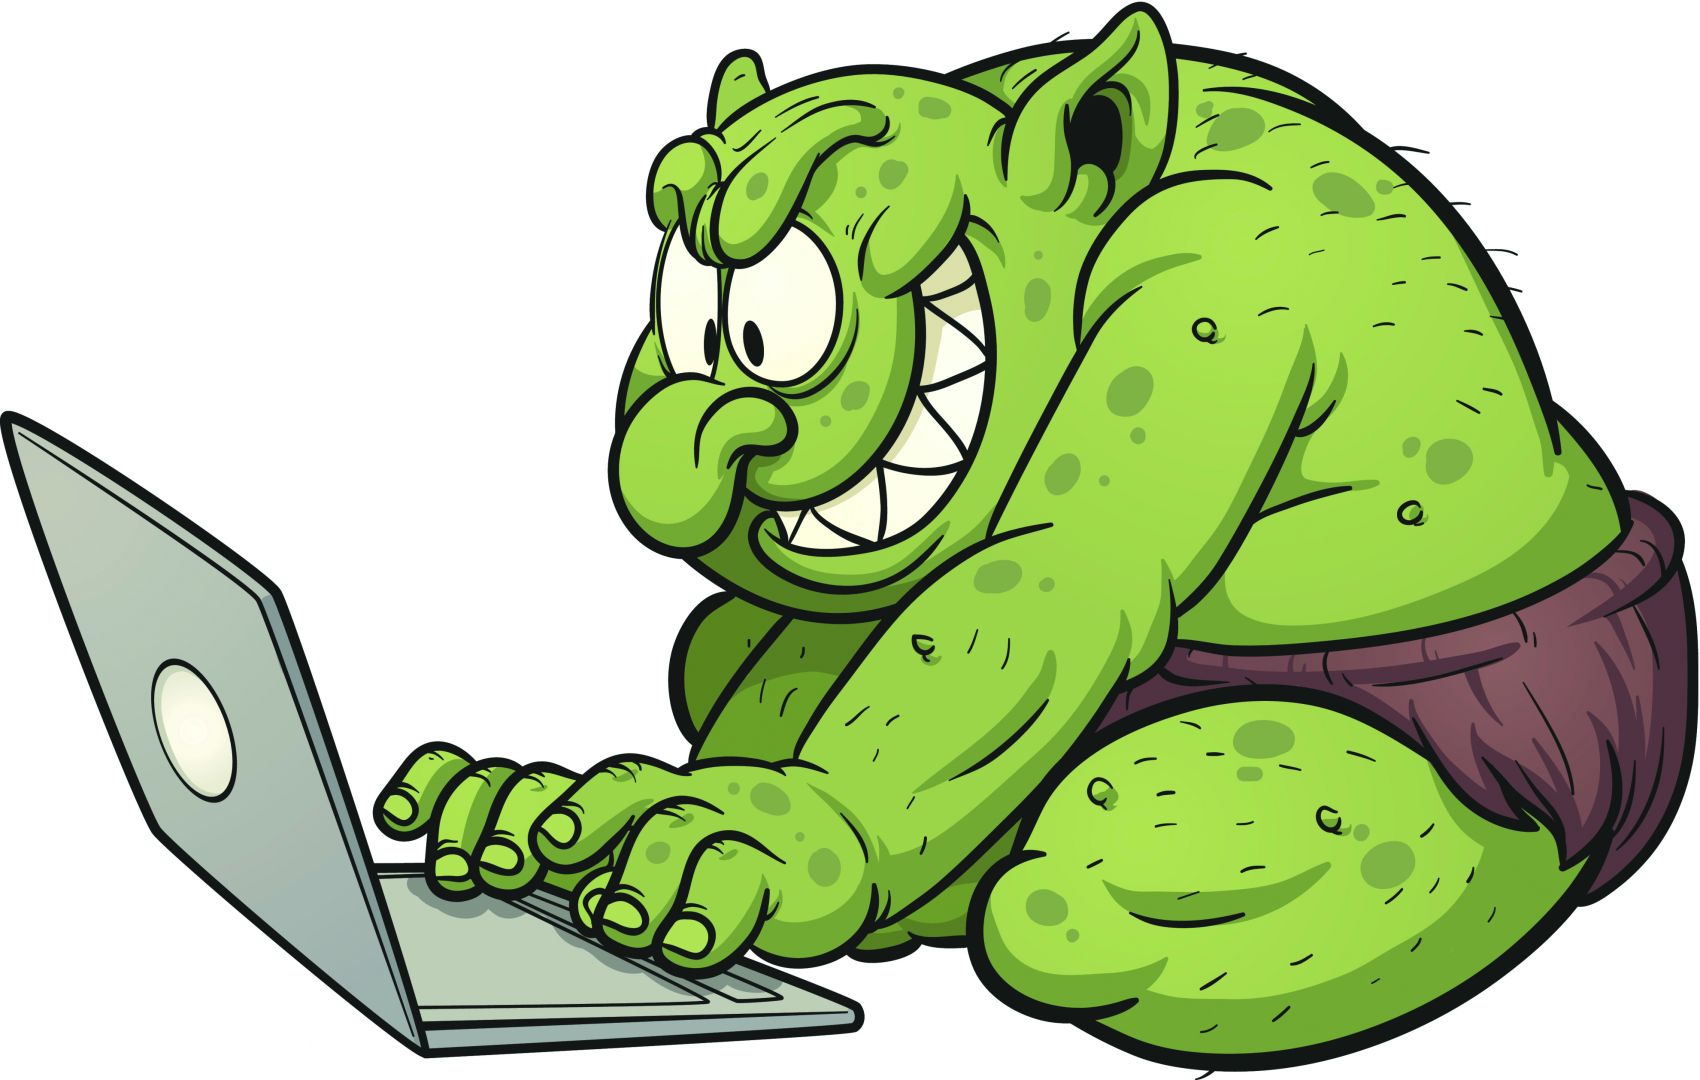 5 Tips for Dealing with Haters and Trolls